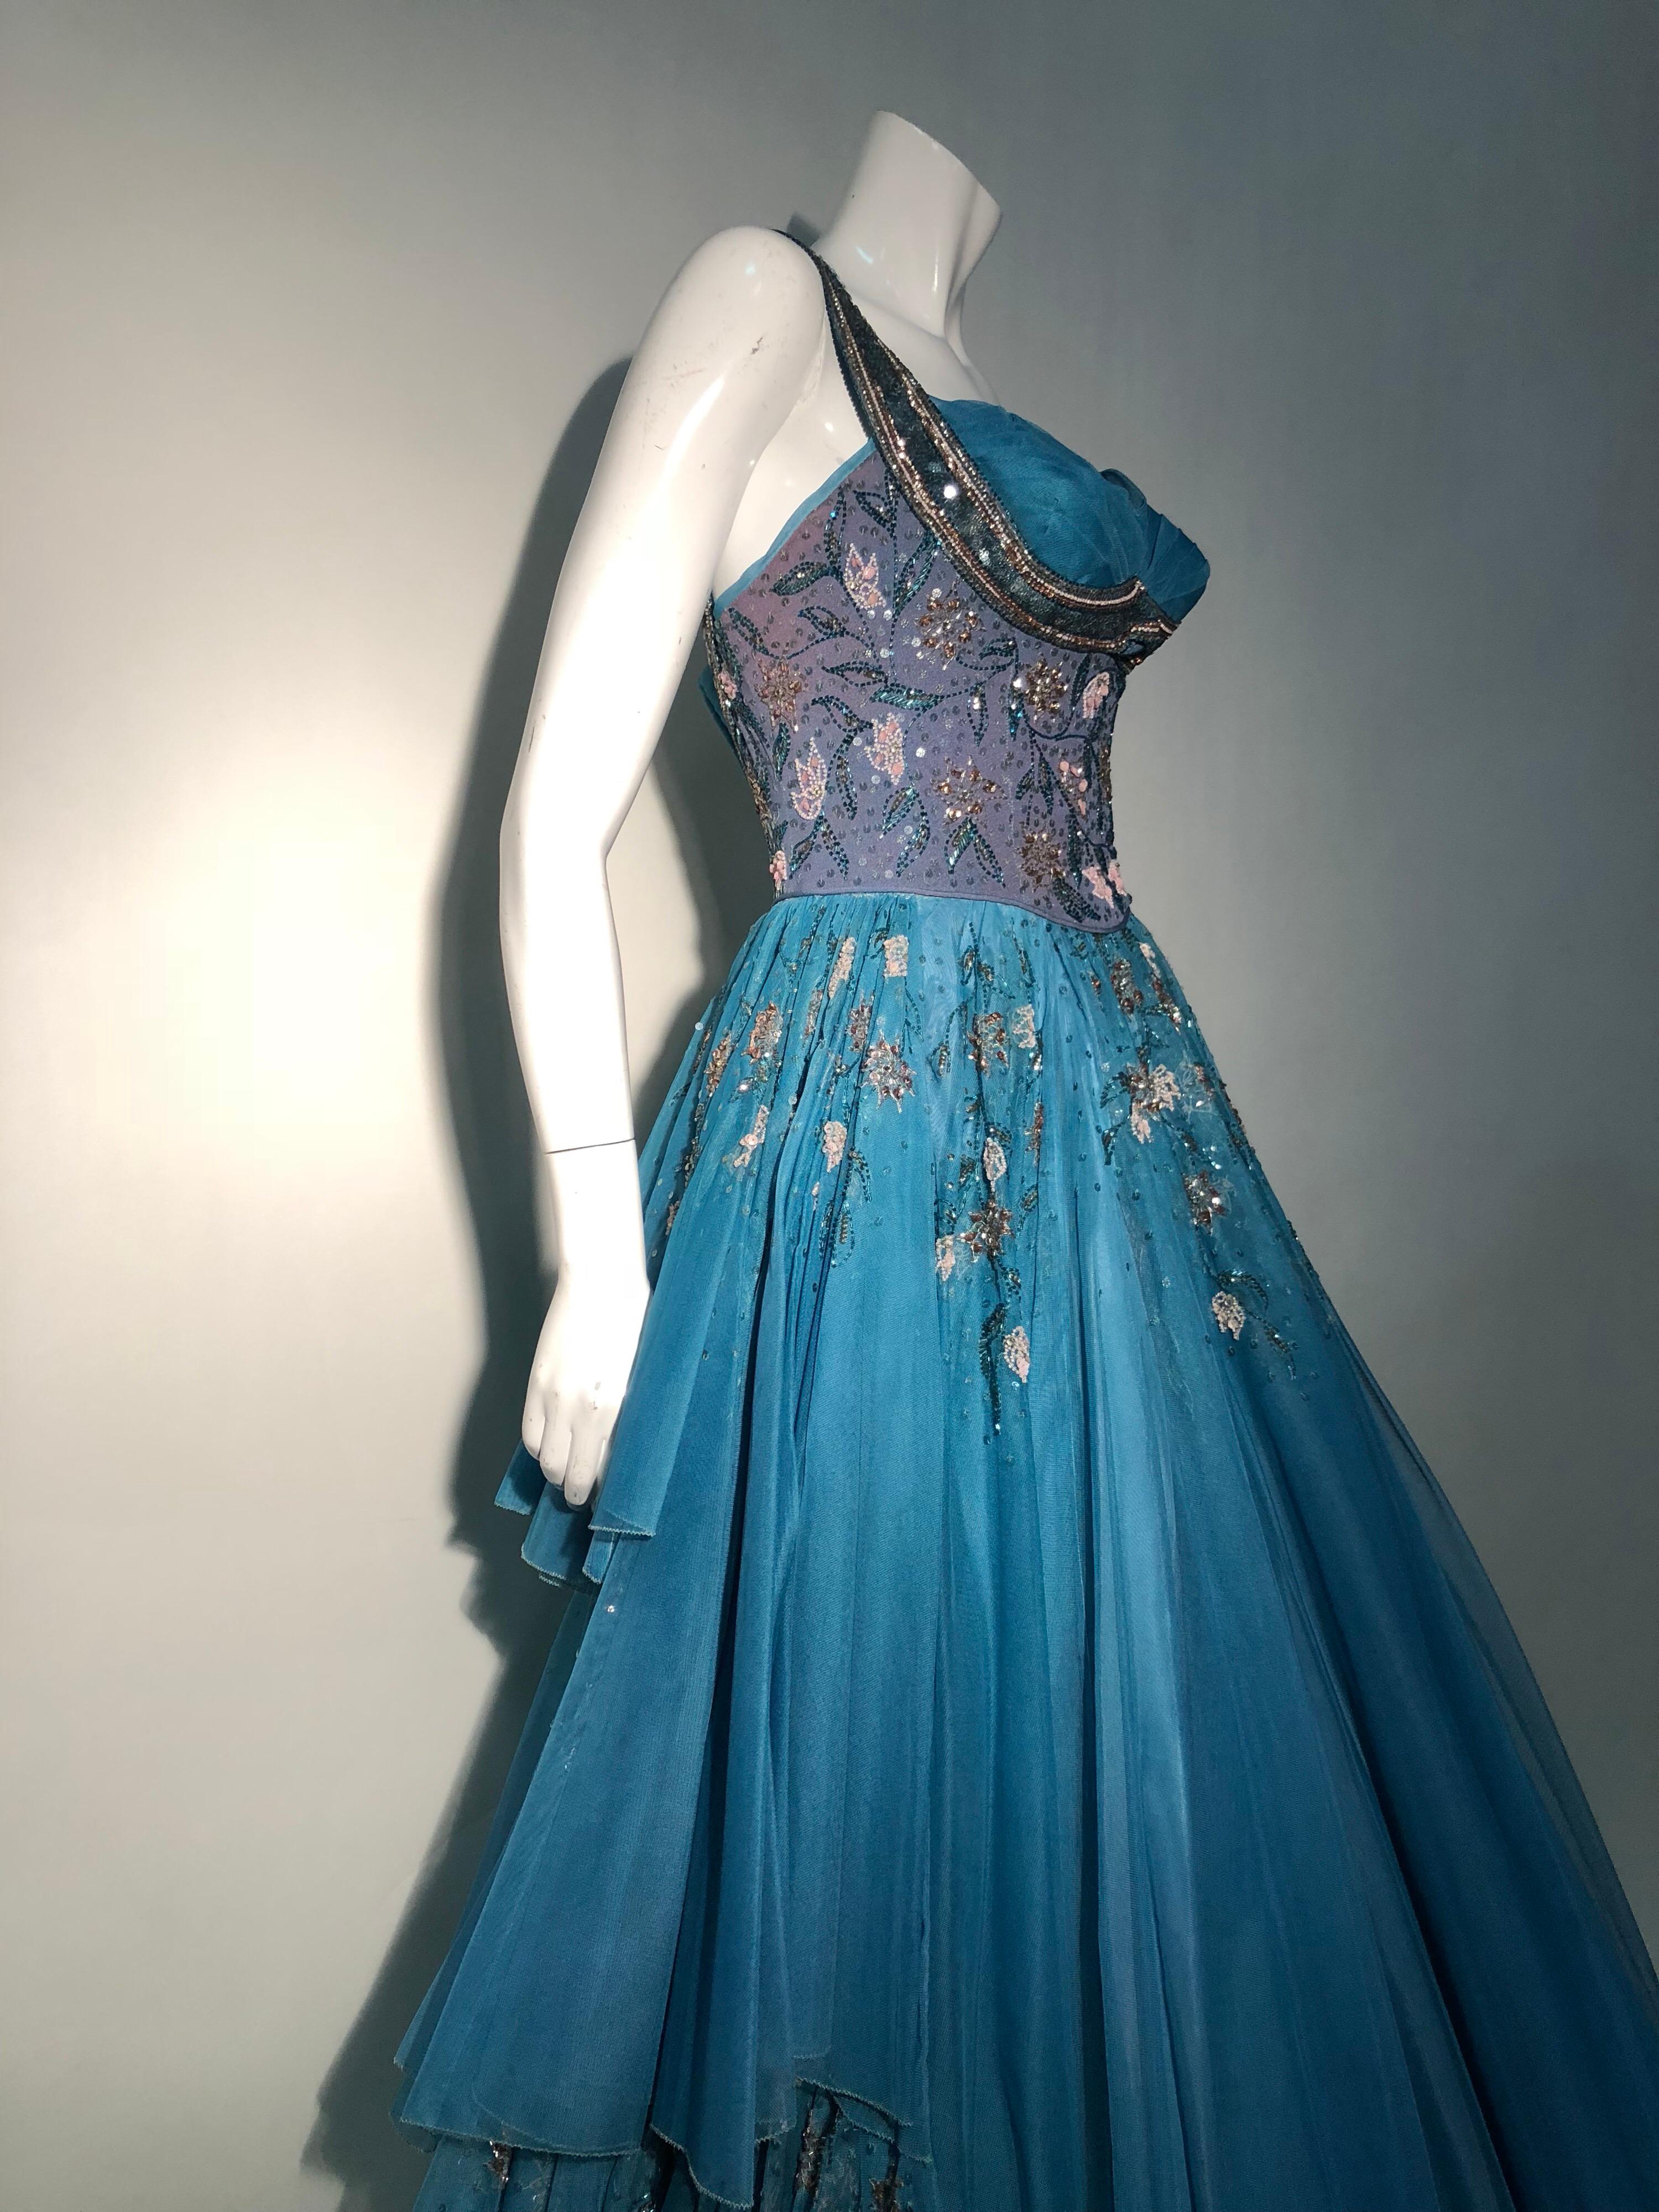 1950s MGM Mme. Etoile by Irene Sharaff Couture Ball Gown in Deep Teal Silk In Excellent Condition For Sale In Gresham, OR